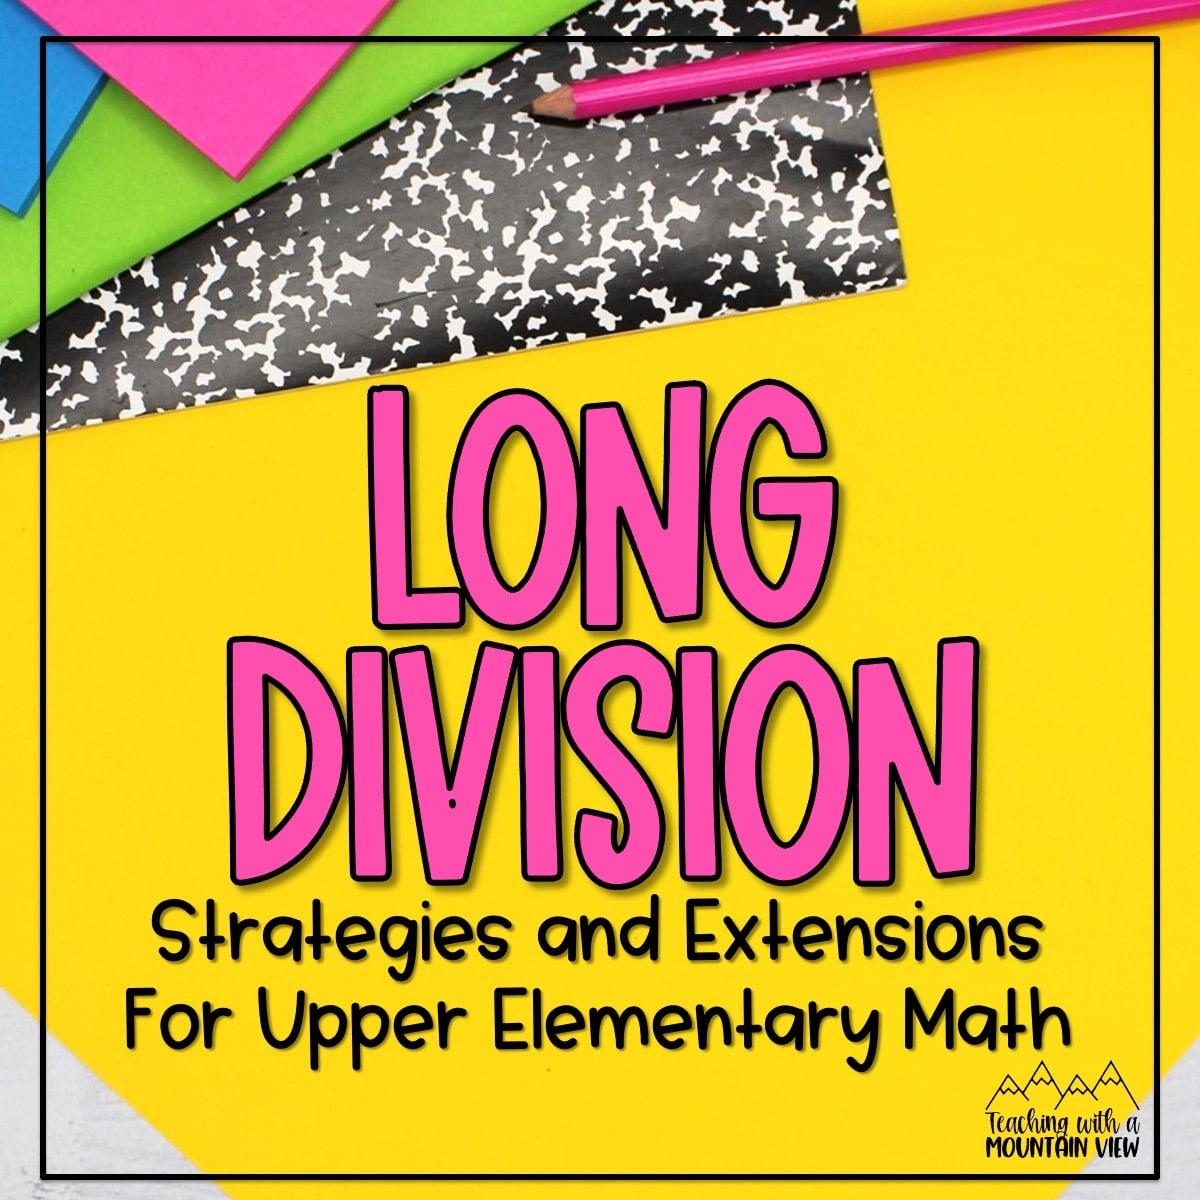 Tips for teaching long divisions strategies, division error analysis, and division word problems. Includes free resources!